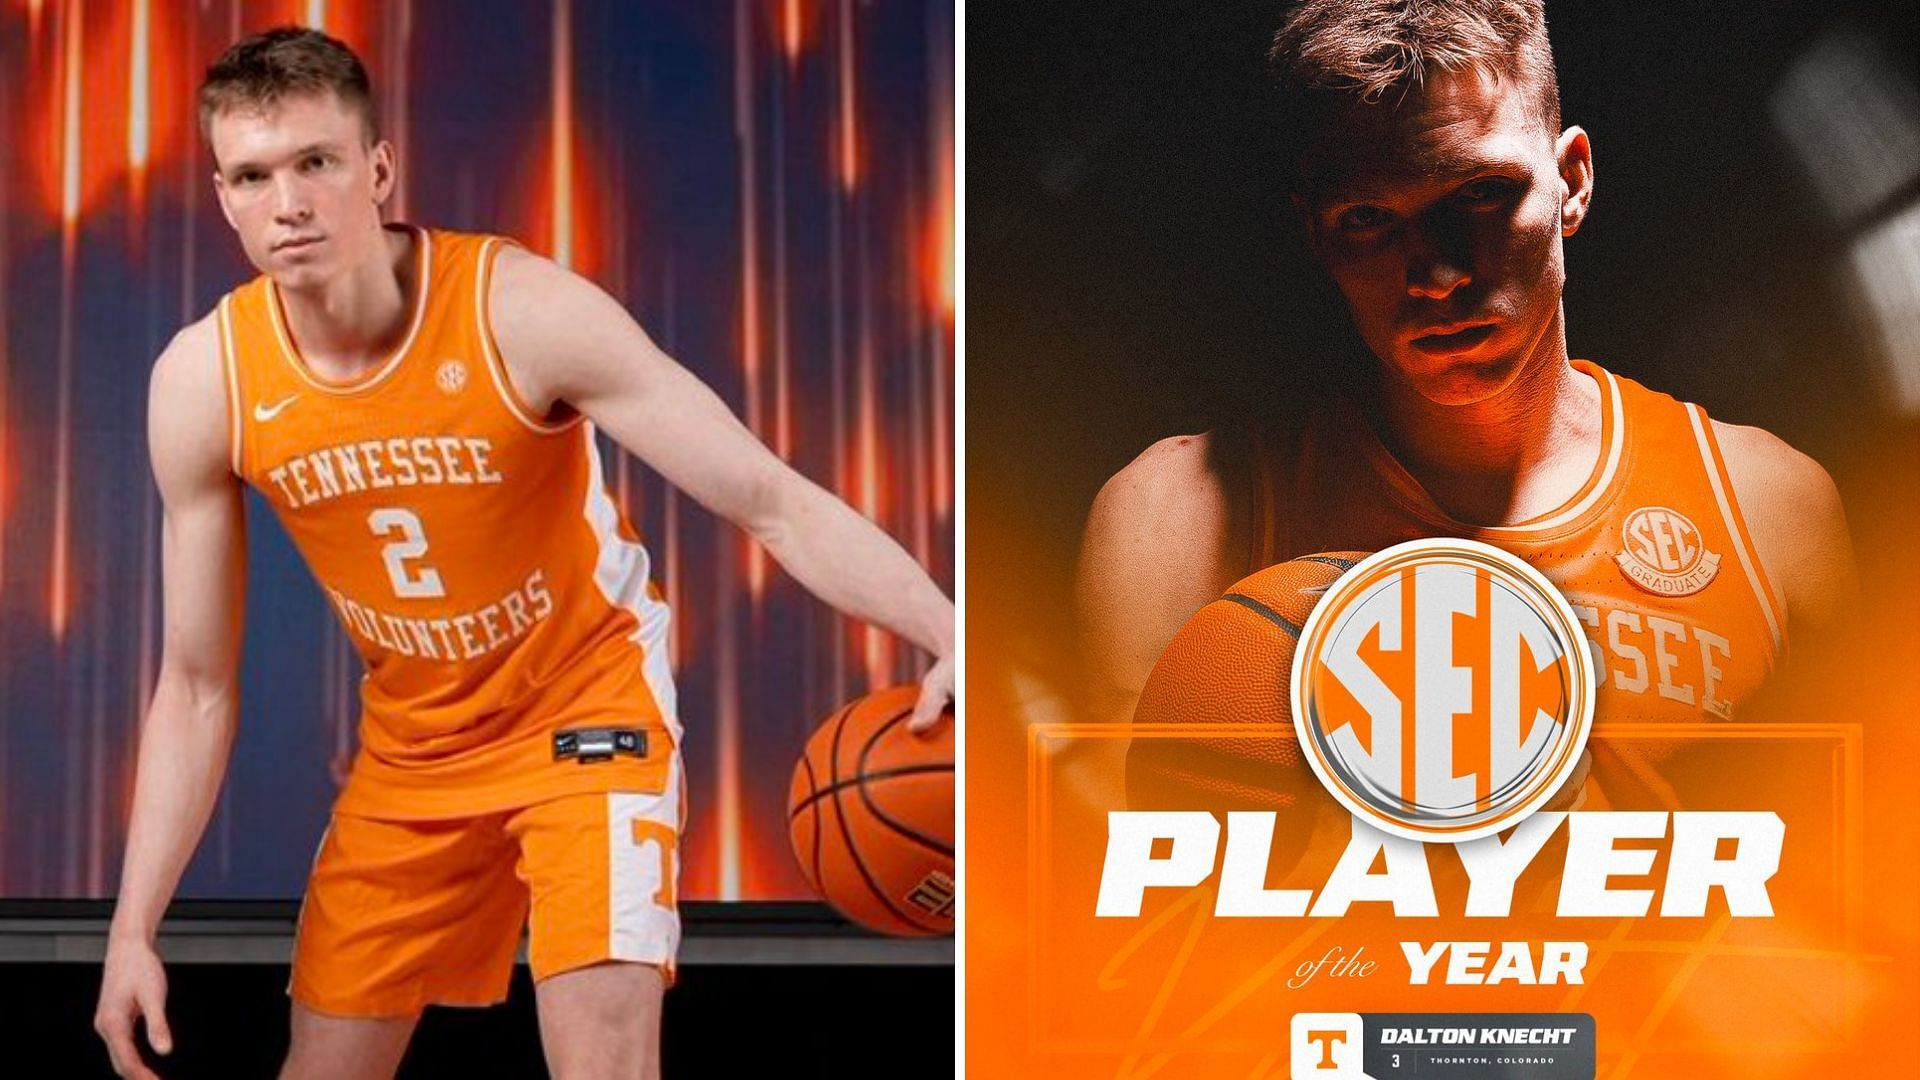 Dalton Knecht wins SEC Player of the Year